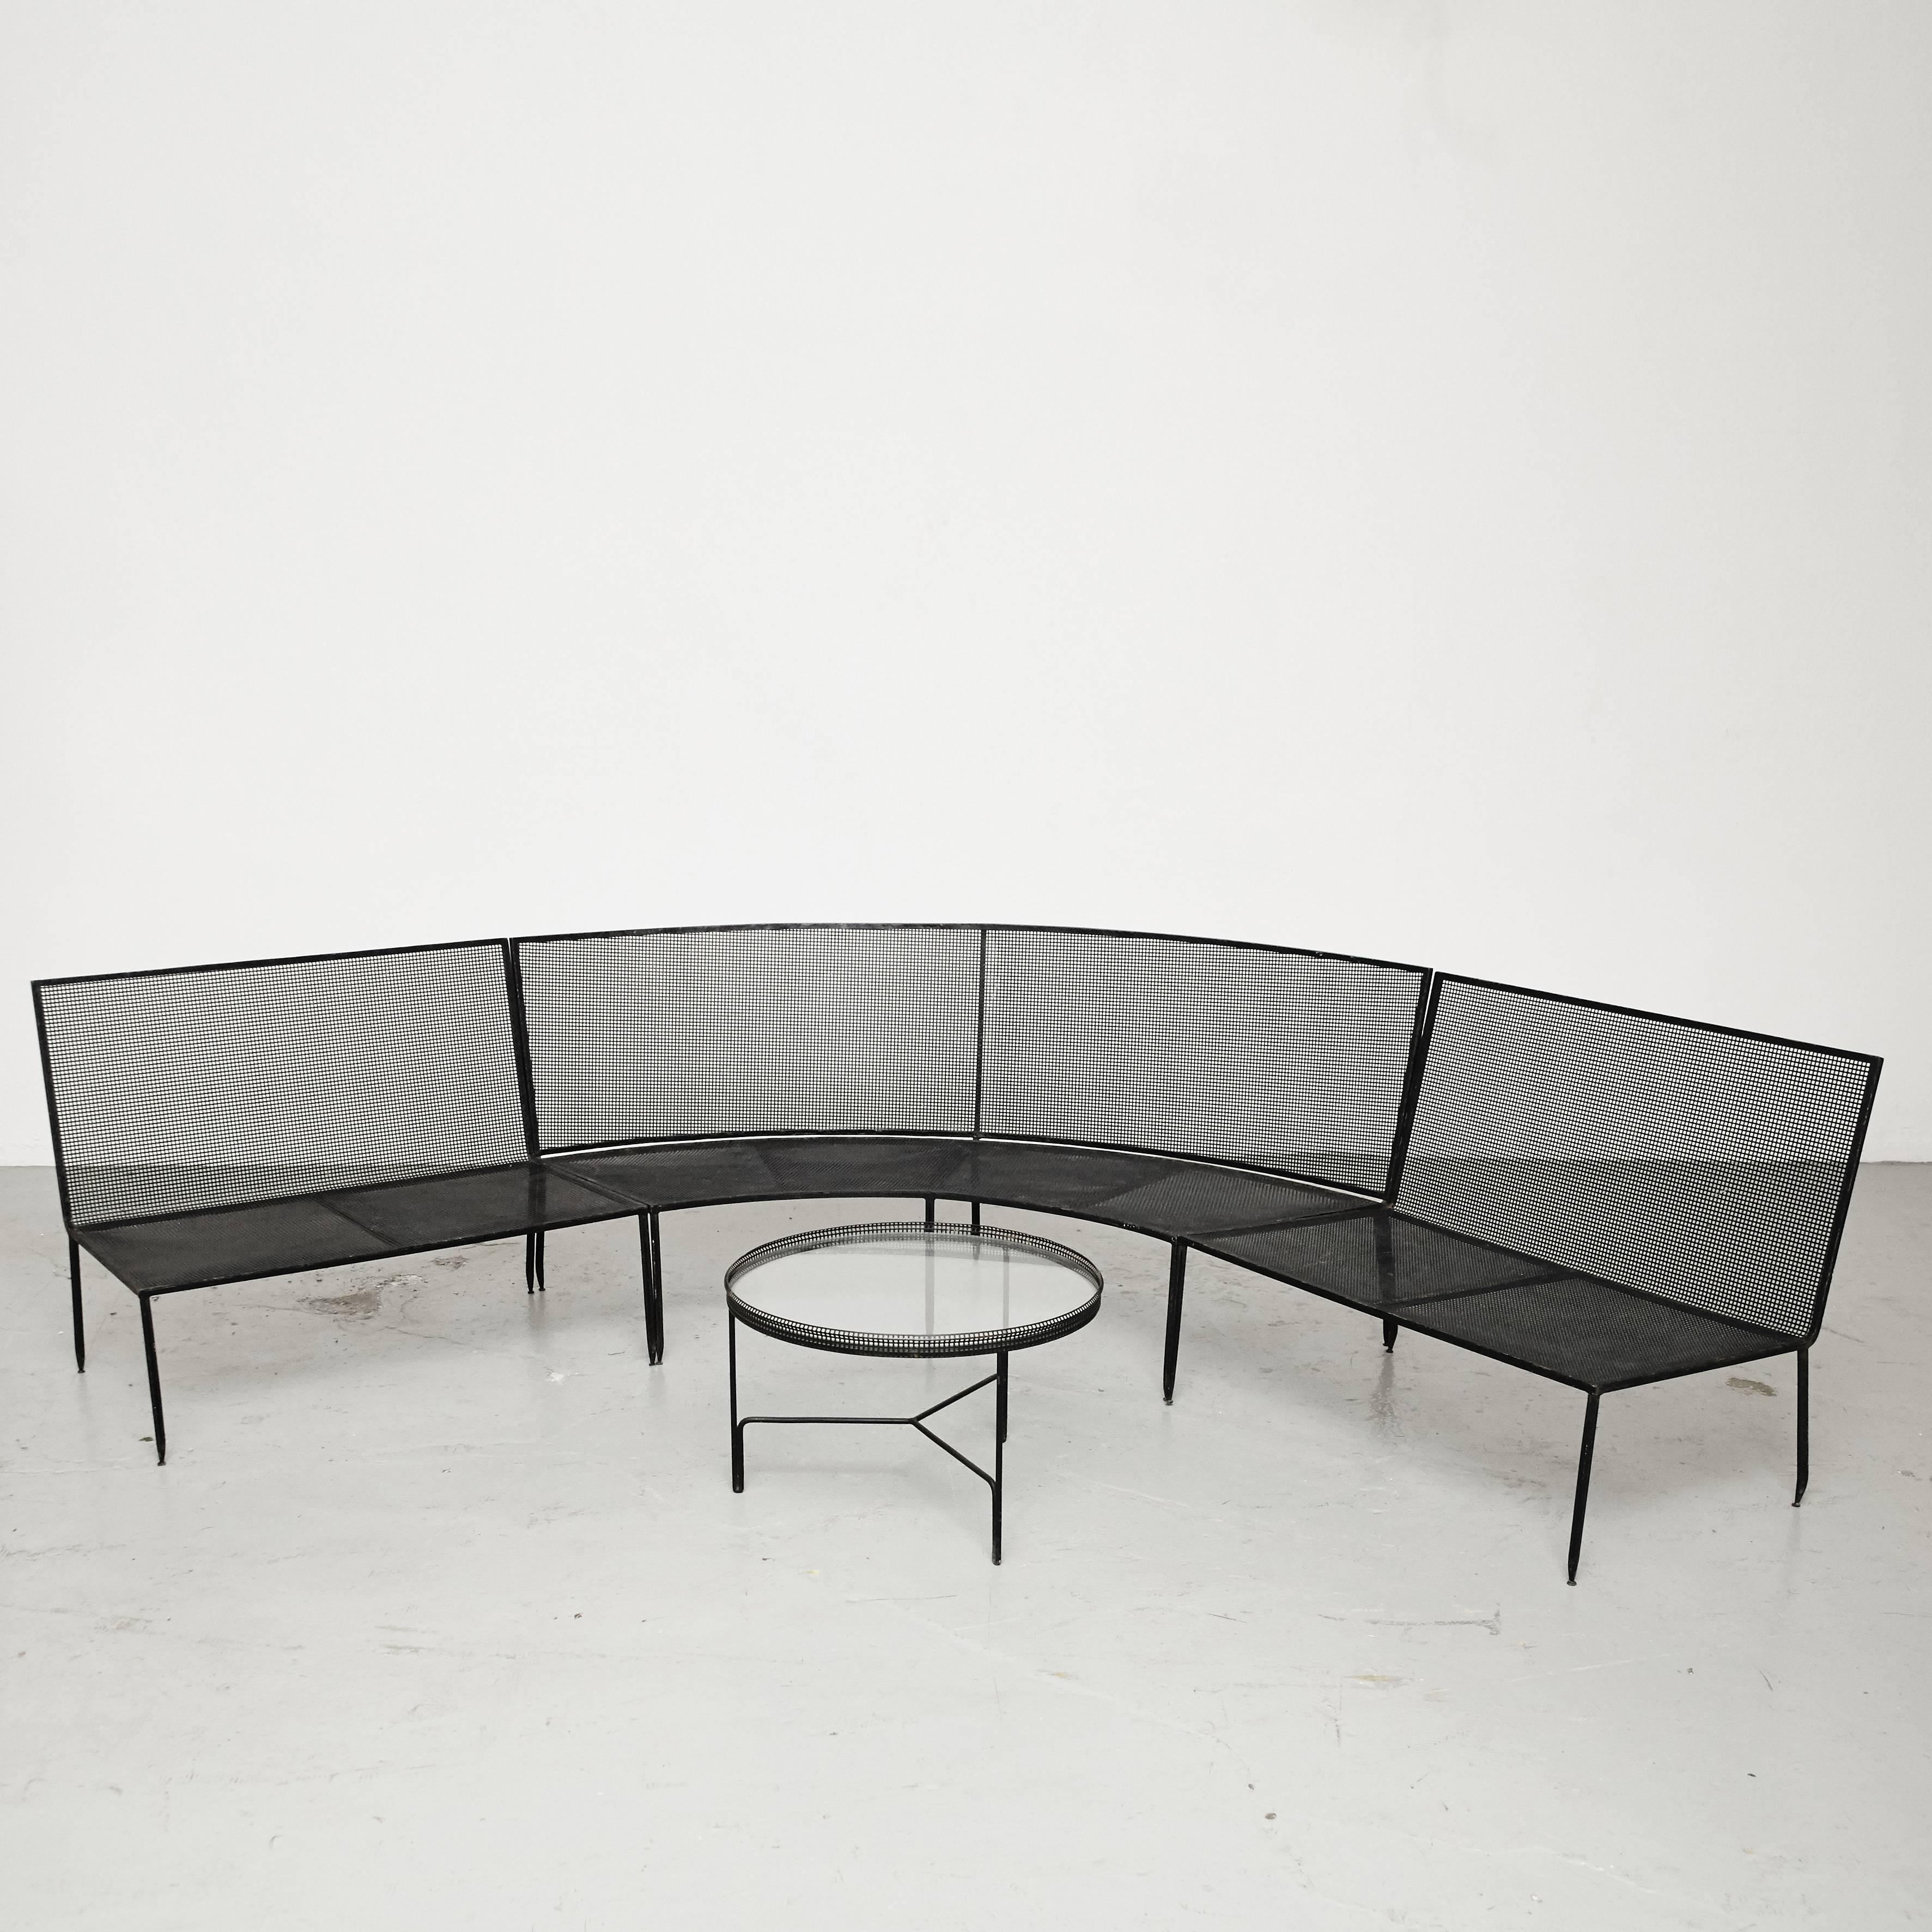 Large sofa and coffee table designed by Mathieu Mate´got, manufactured by Ateliers Mate got in France, circa 1950.

The large sofa consists out of three separate parts that allow different shapes and designs.

In good original condition with